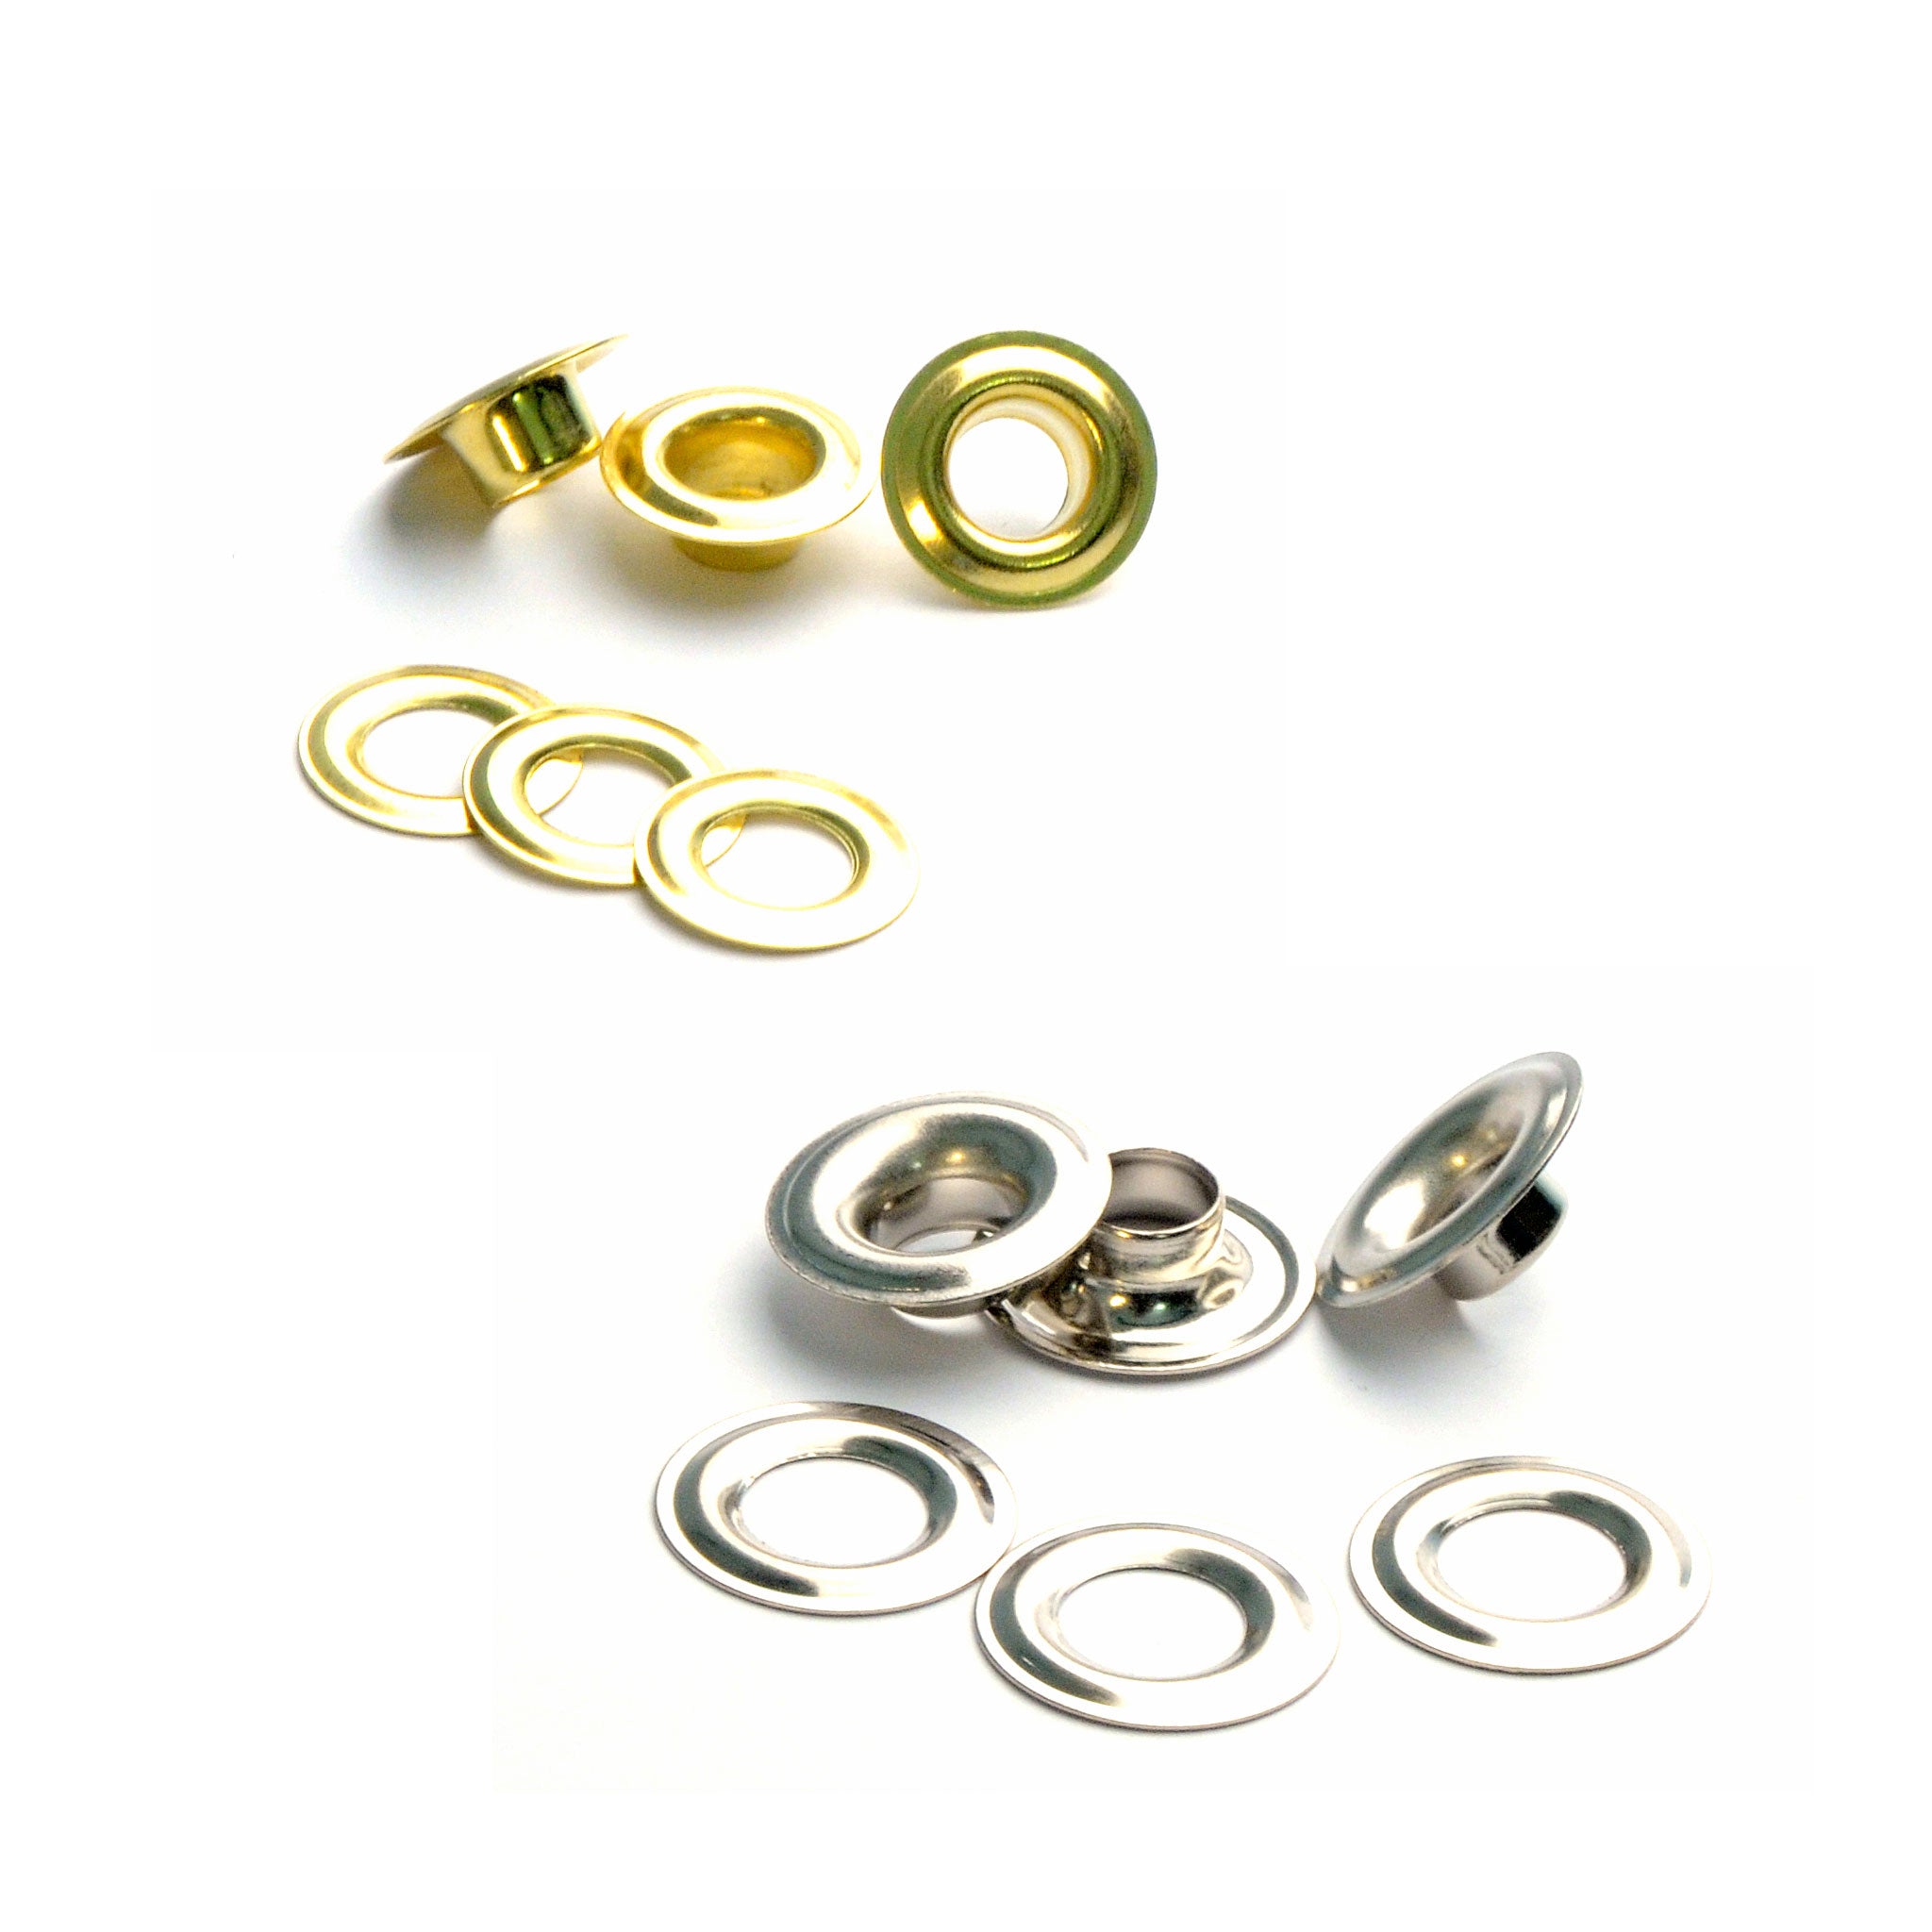 Extra Long Solid Brass Grommets (Eyelet and Washer) from Identity Leathercraft